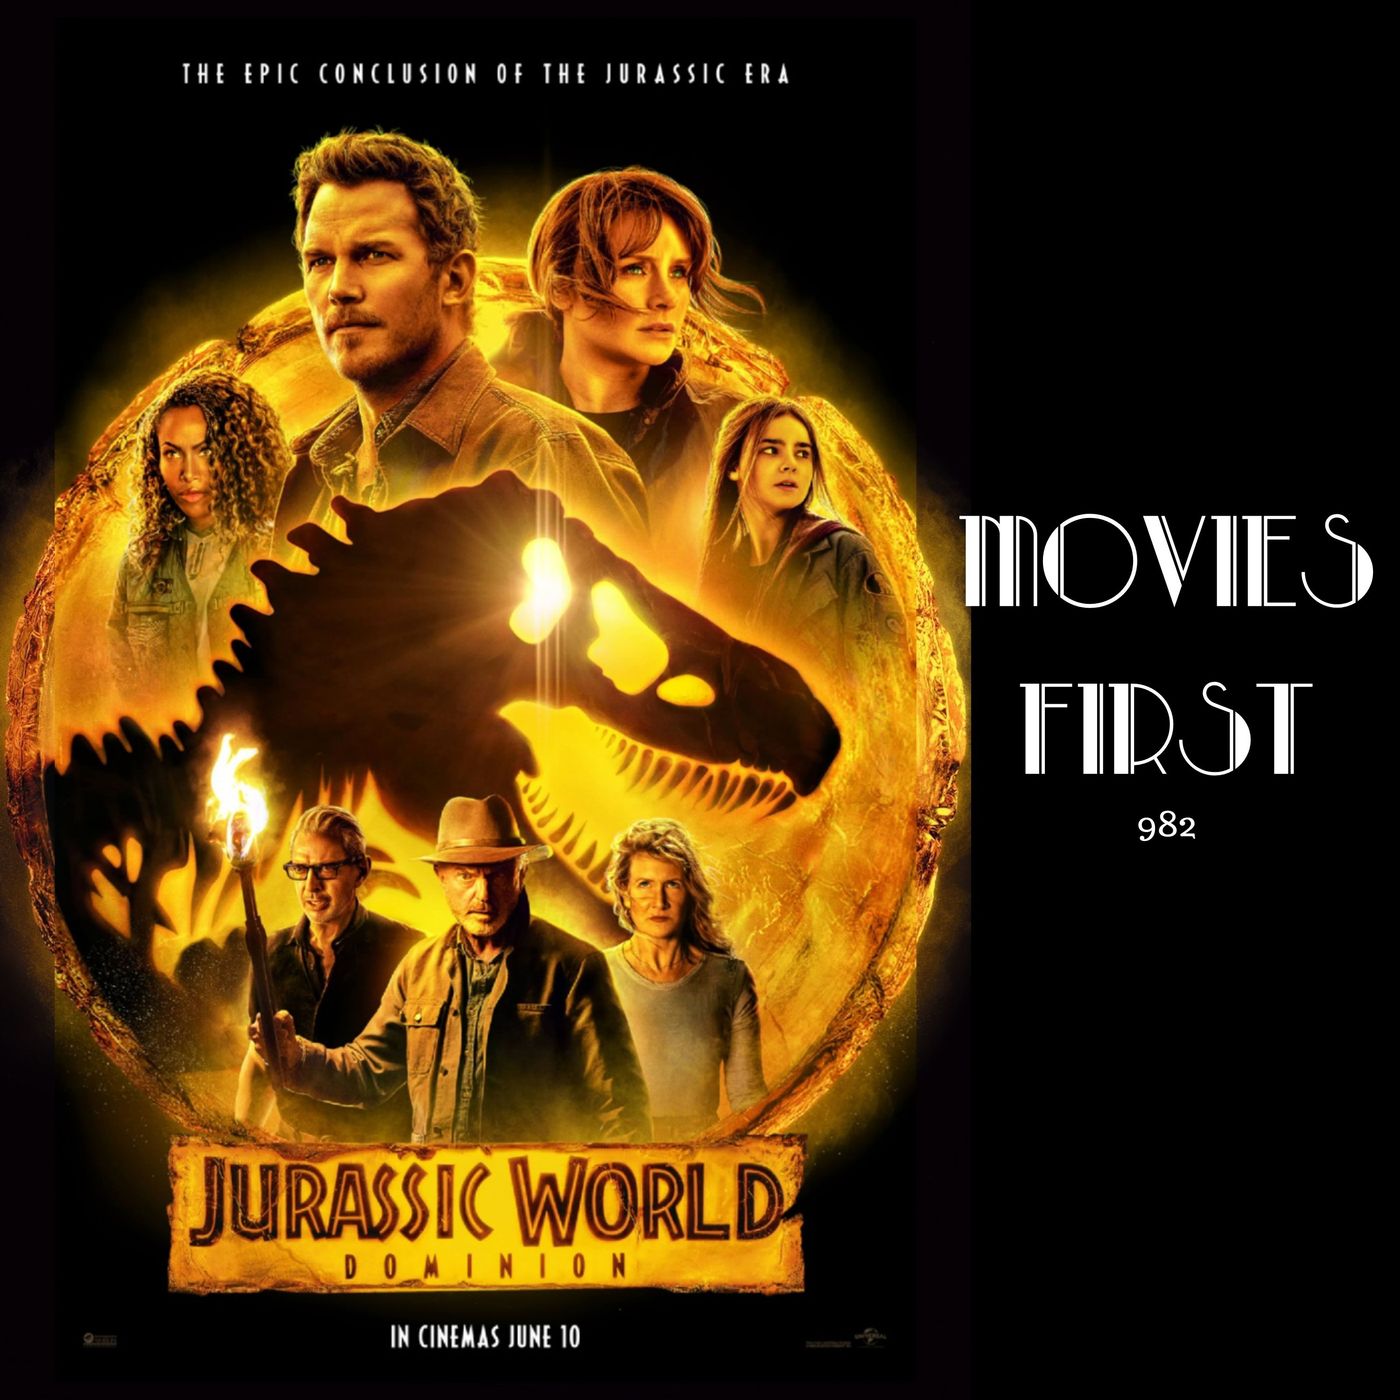 Jurassic World Dominion (Action, Adventure, Sci-Fi) (Review) Image